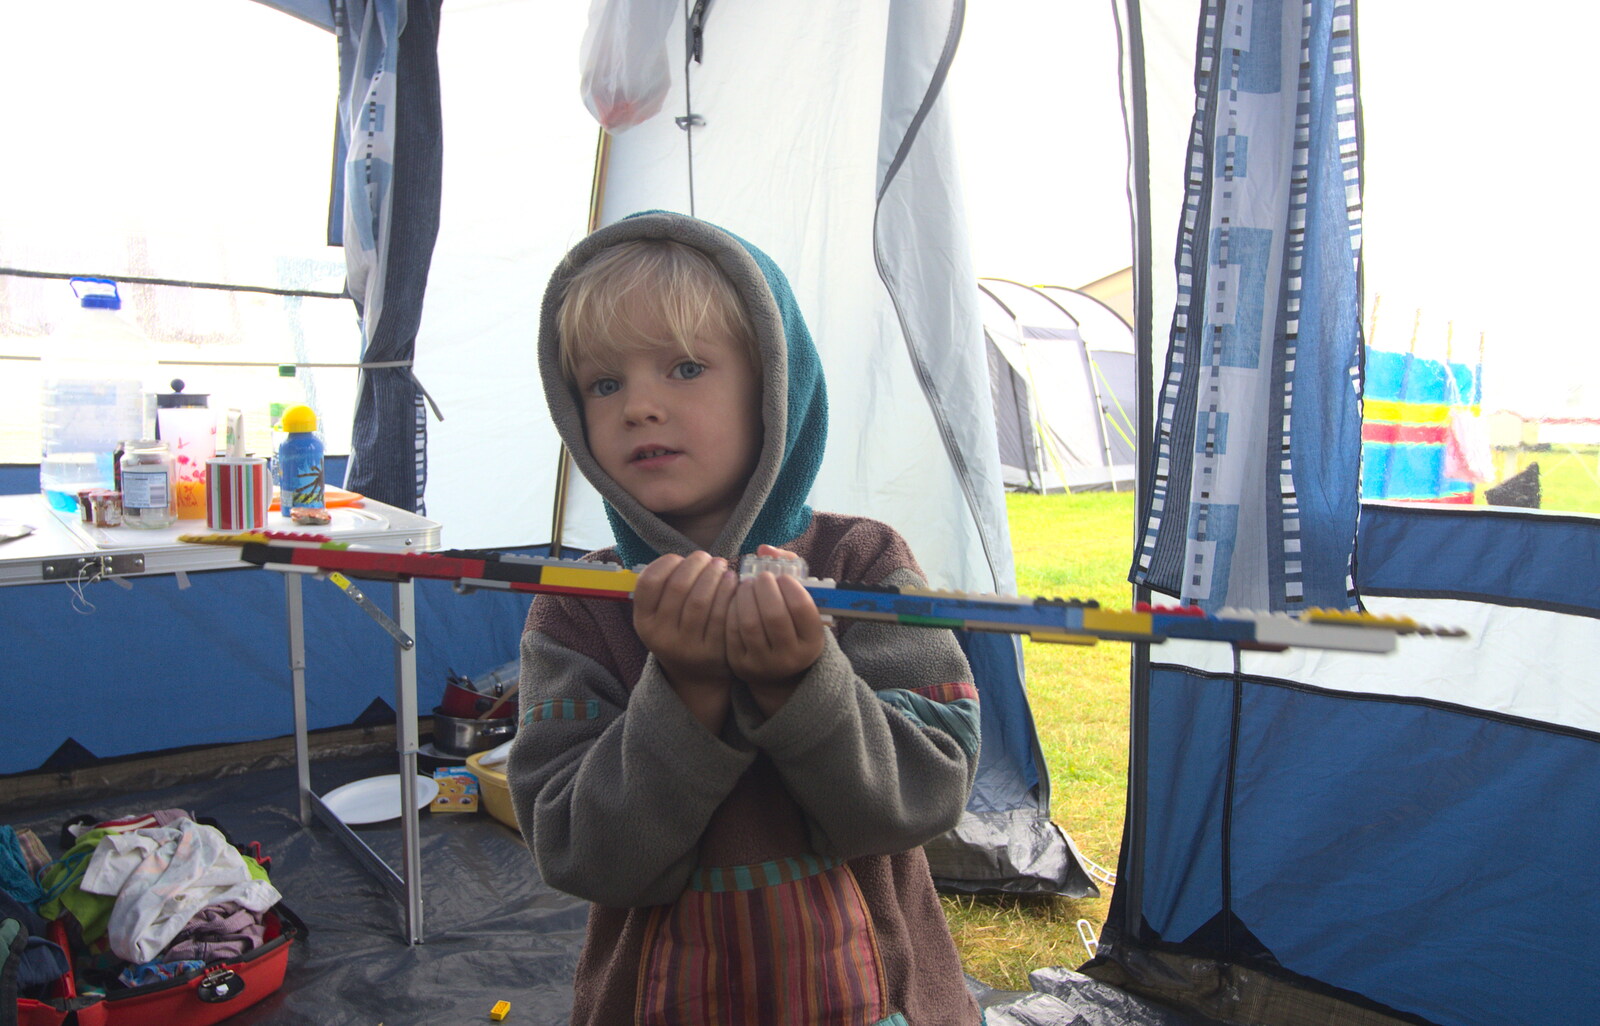 Harry makes a double sword out of Lego from A Wet Weekend of Camping, Waxham Sands, Norfolk - 13th June 2015